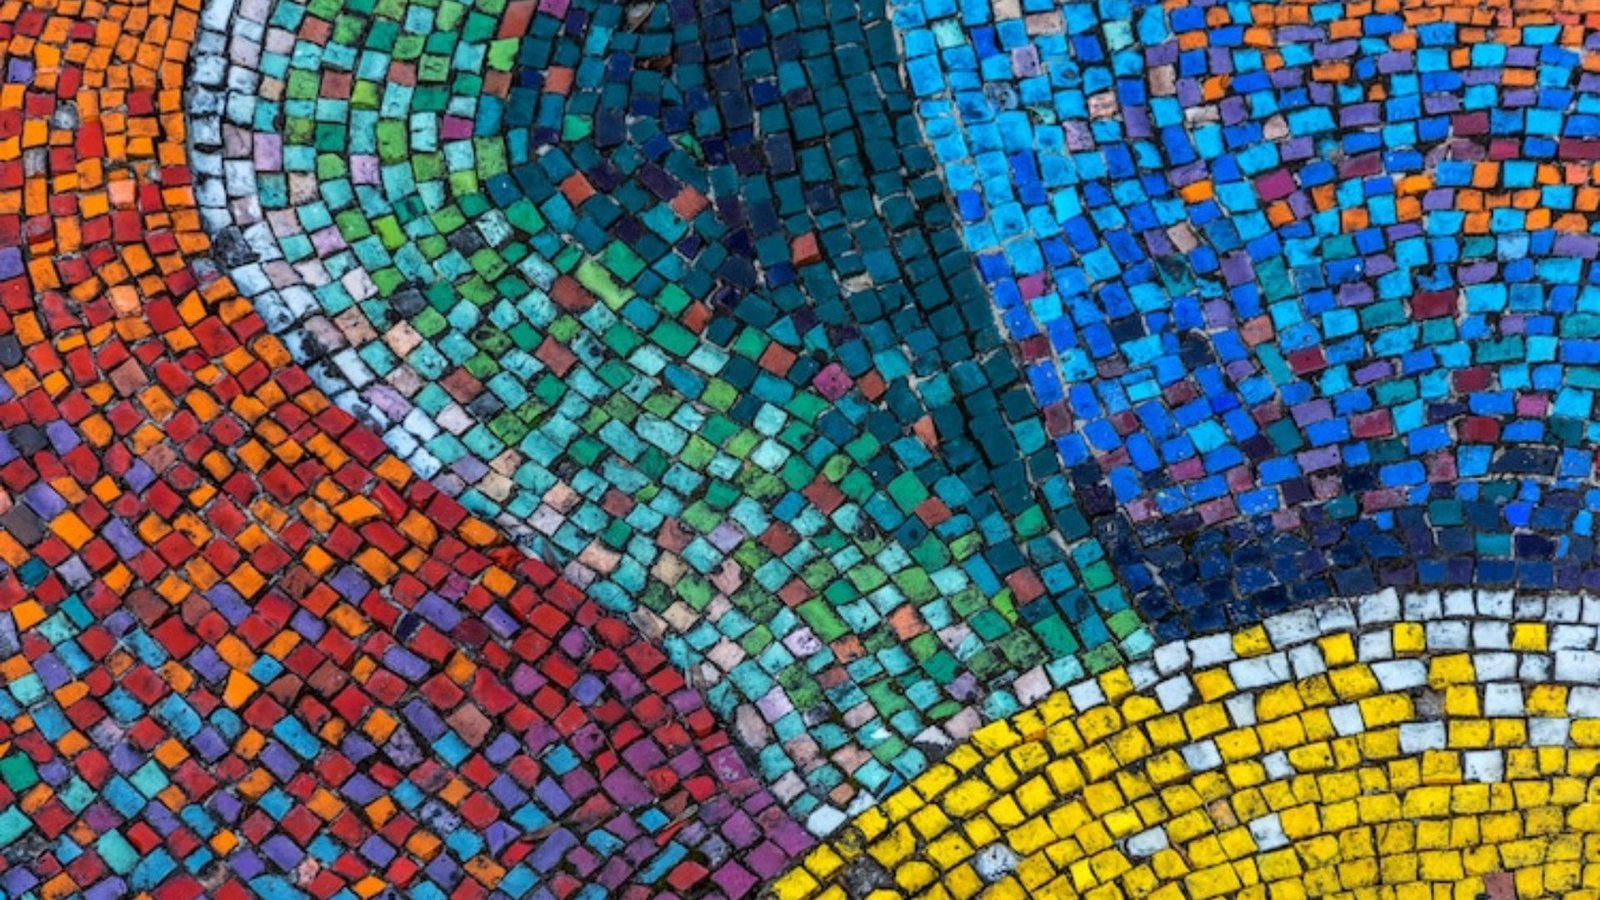 this image shows Mosaic Art Piece